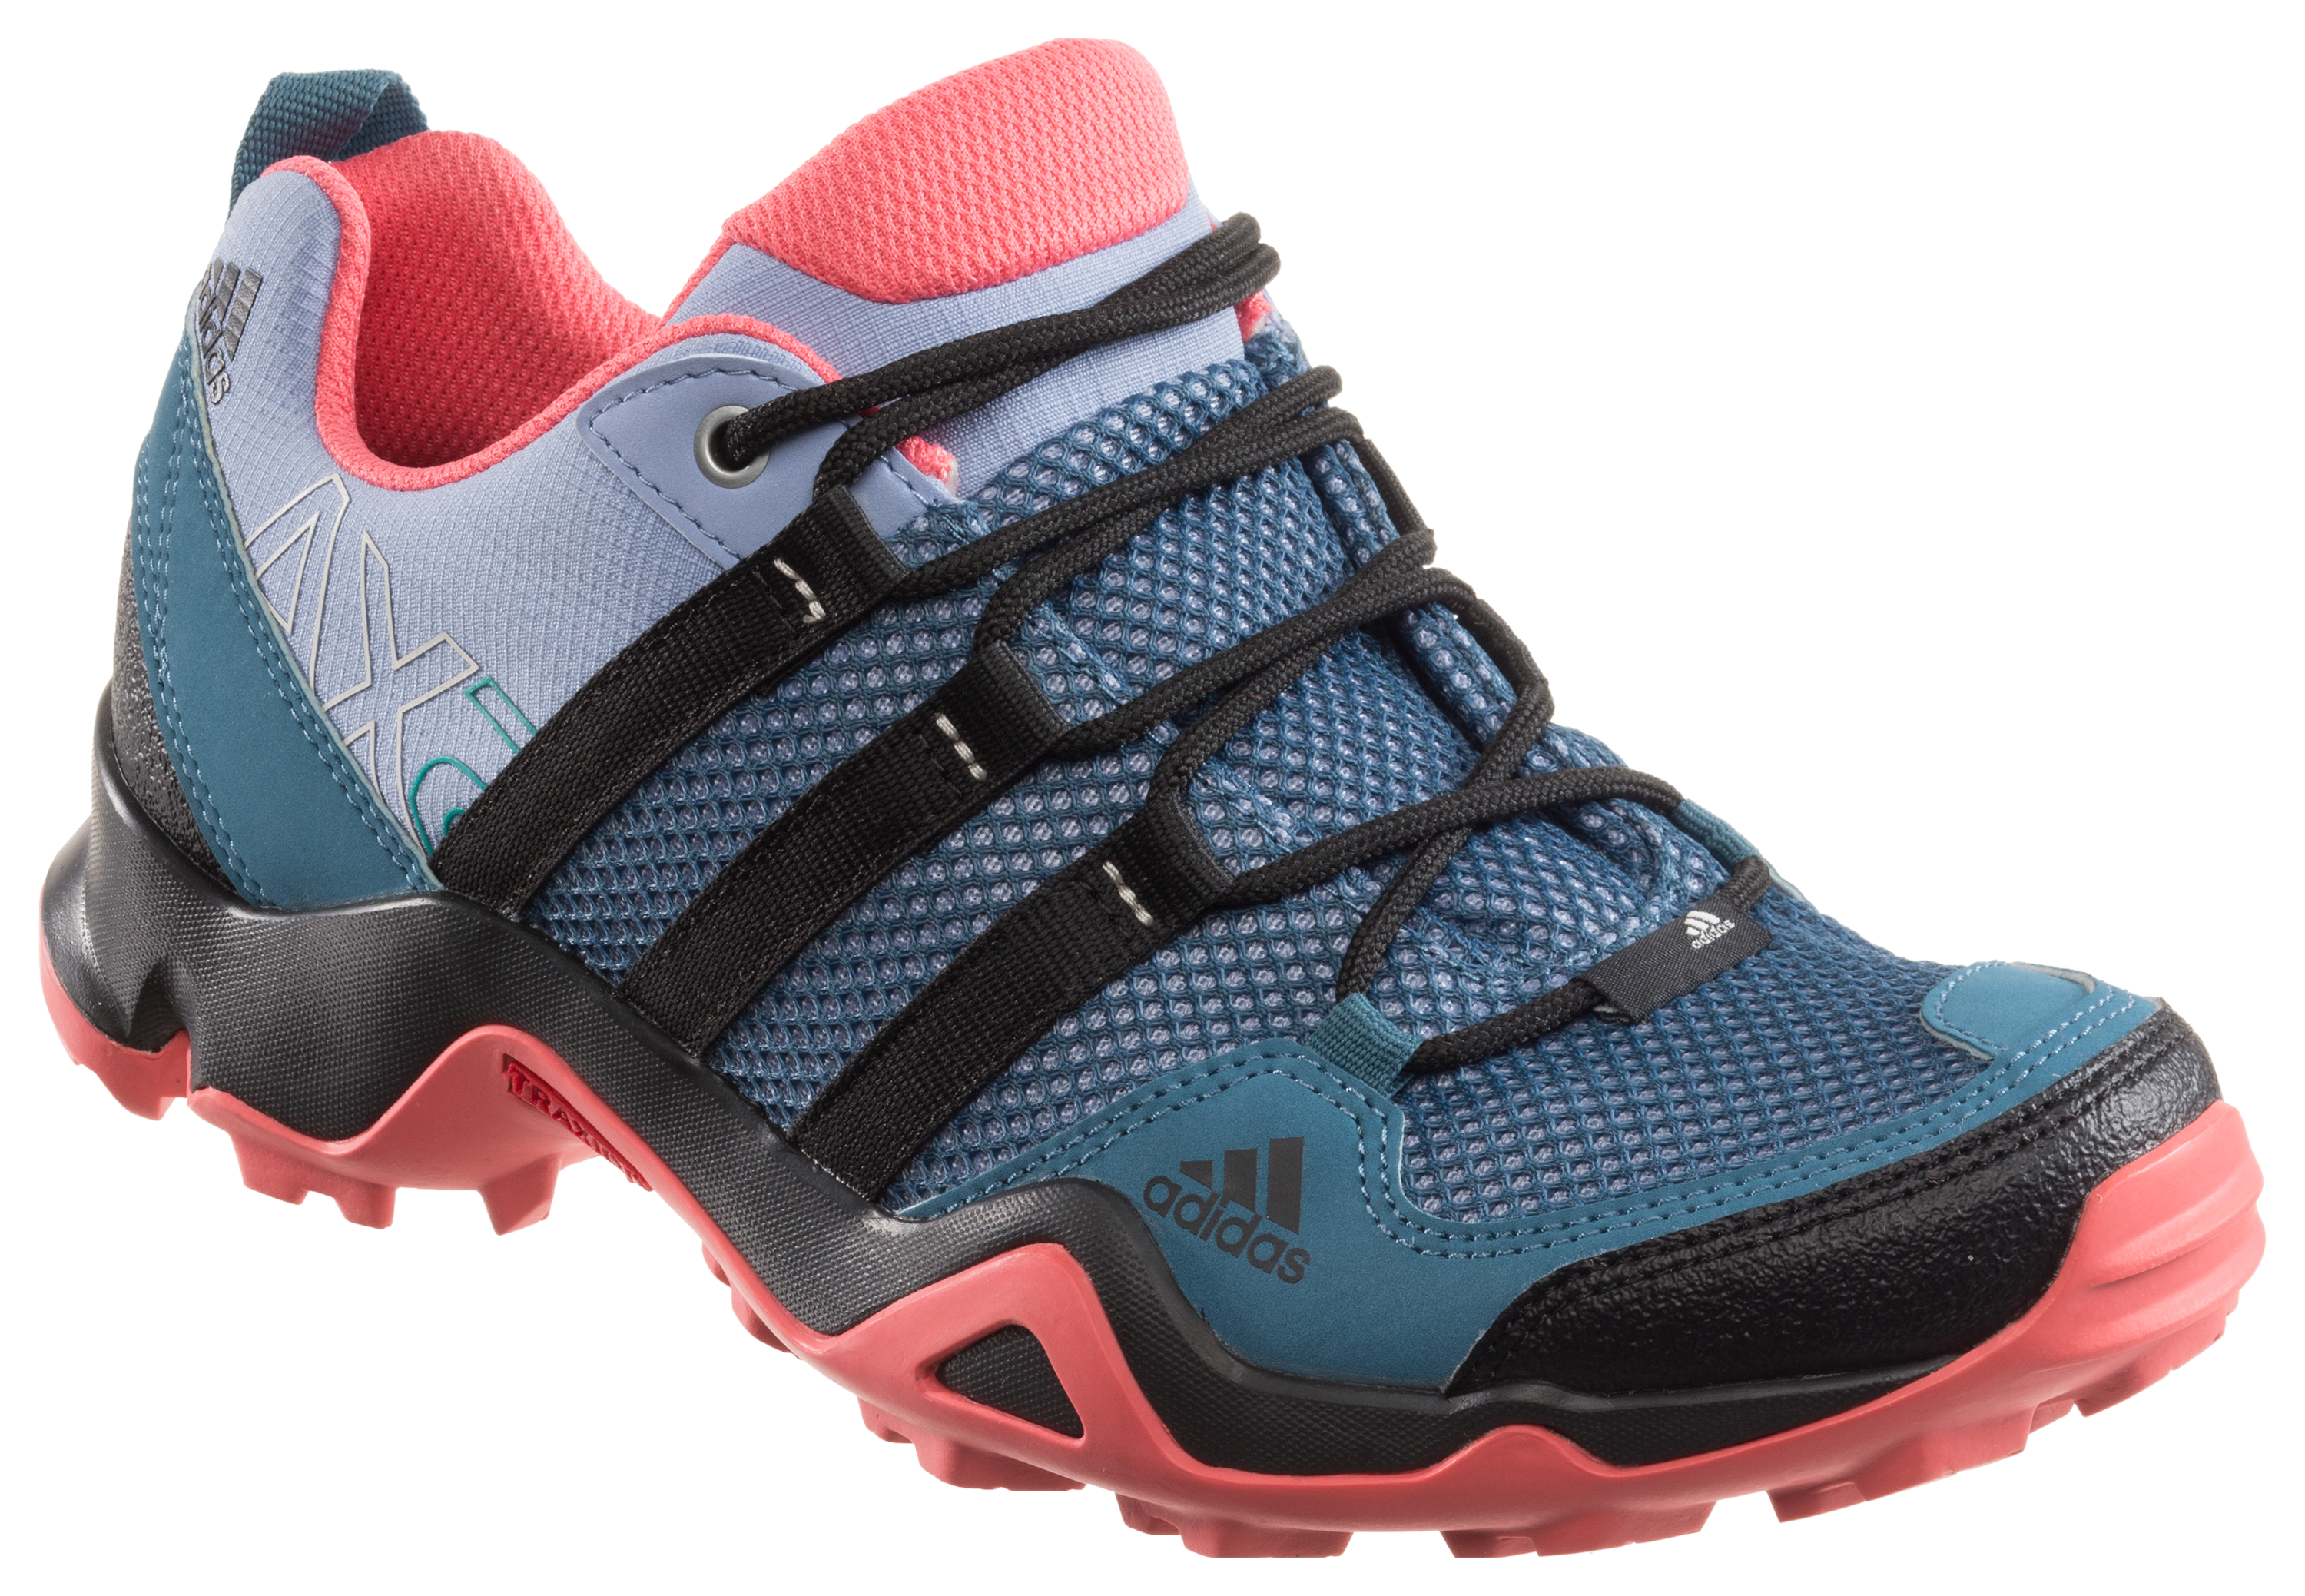 adidas outdoor AX2 Hiking Shoes for Ladies | Bass Pro Shops